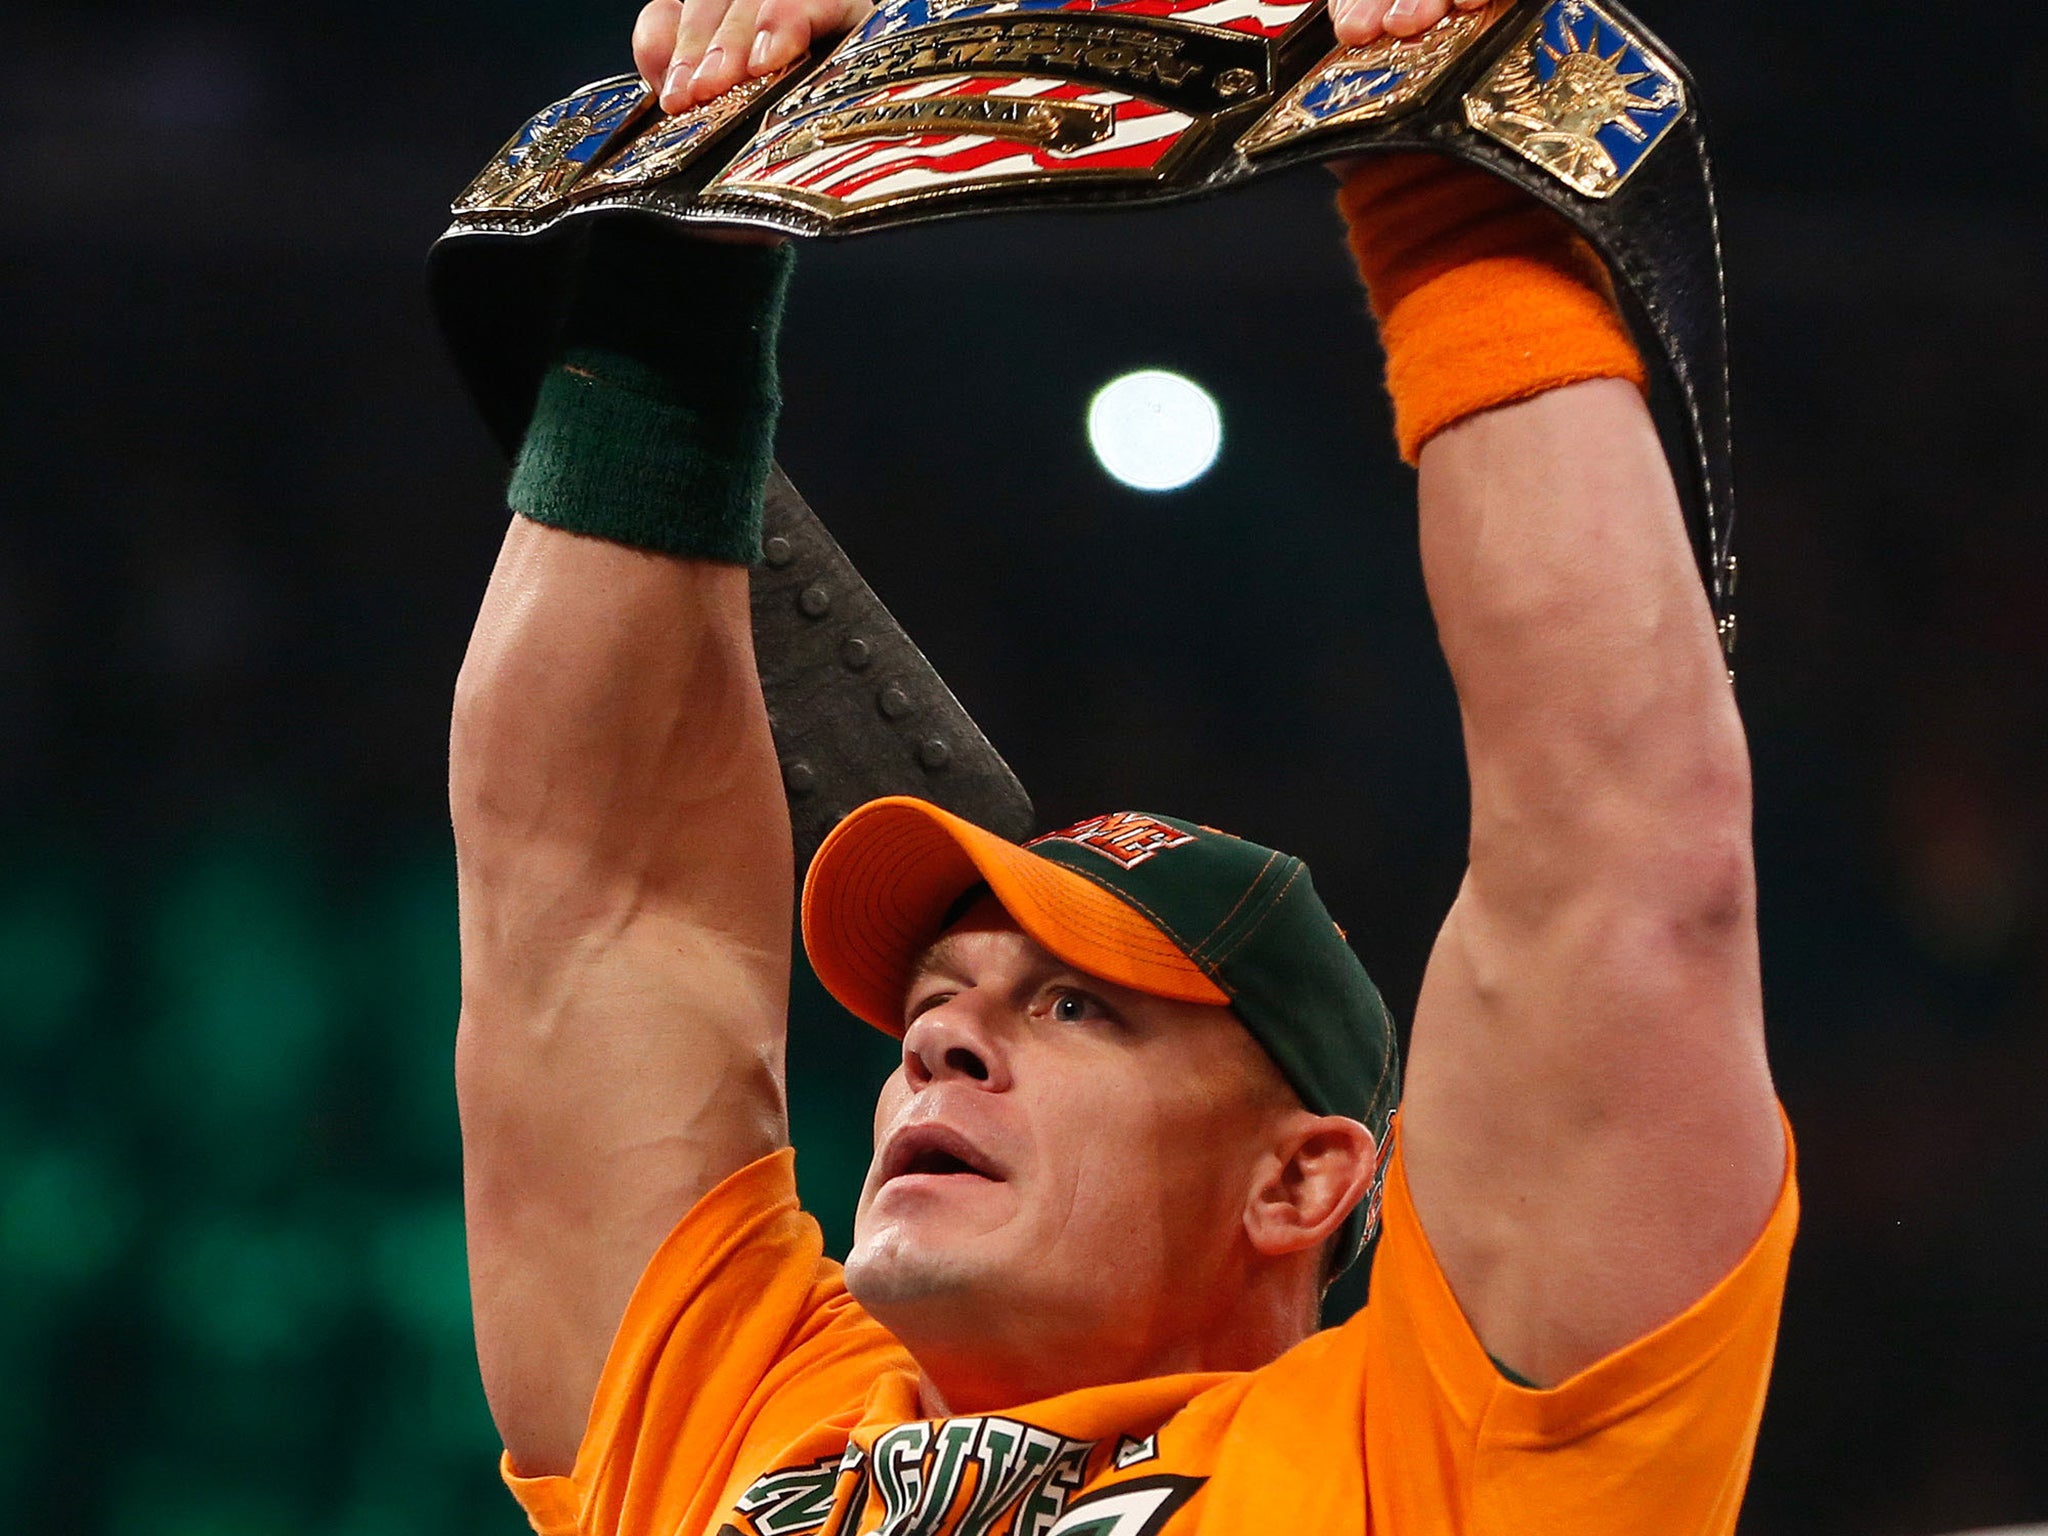 WWE news: WrestleMania 32 plans in chaos after John Cena undergoes shoulder  surgery, will be out 6-9 months, The Independent